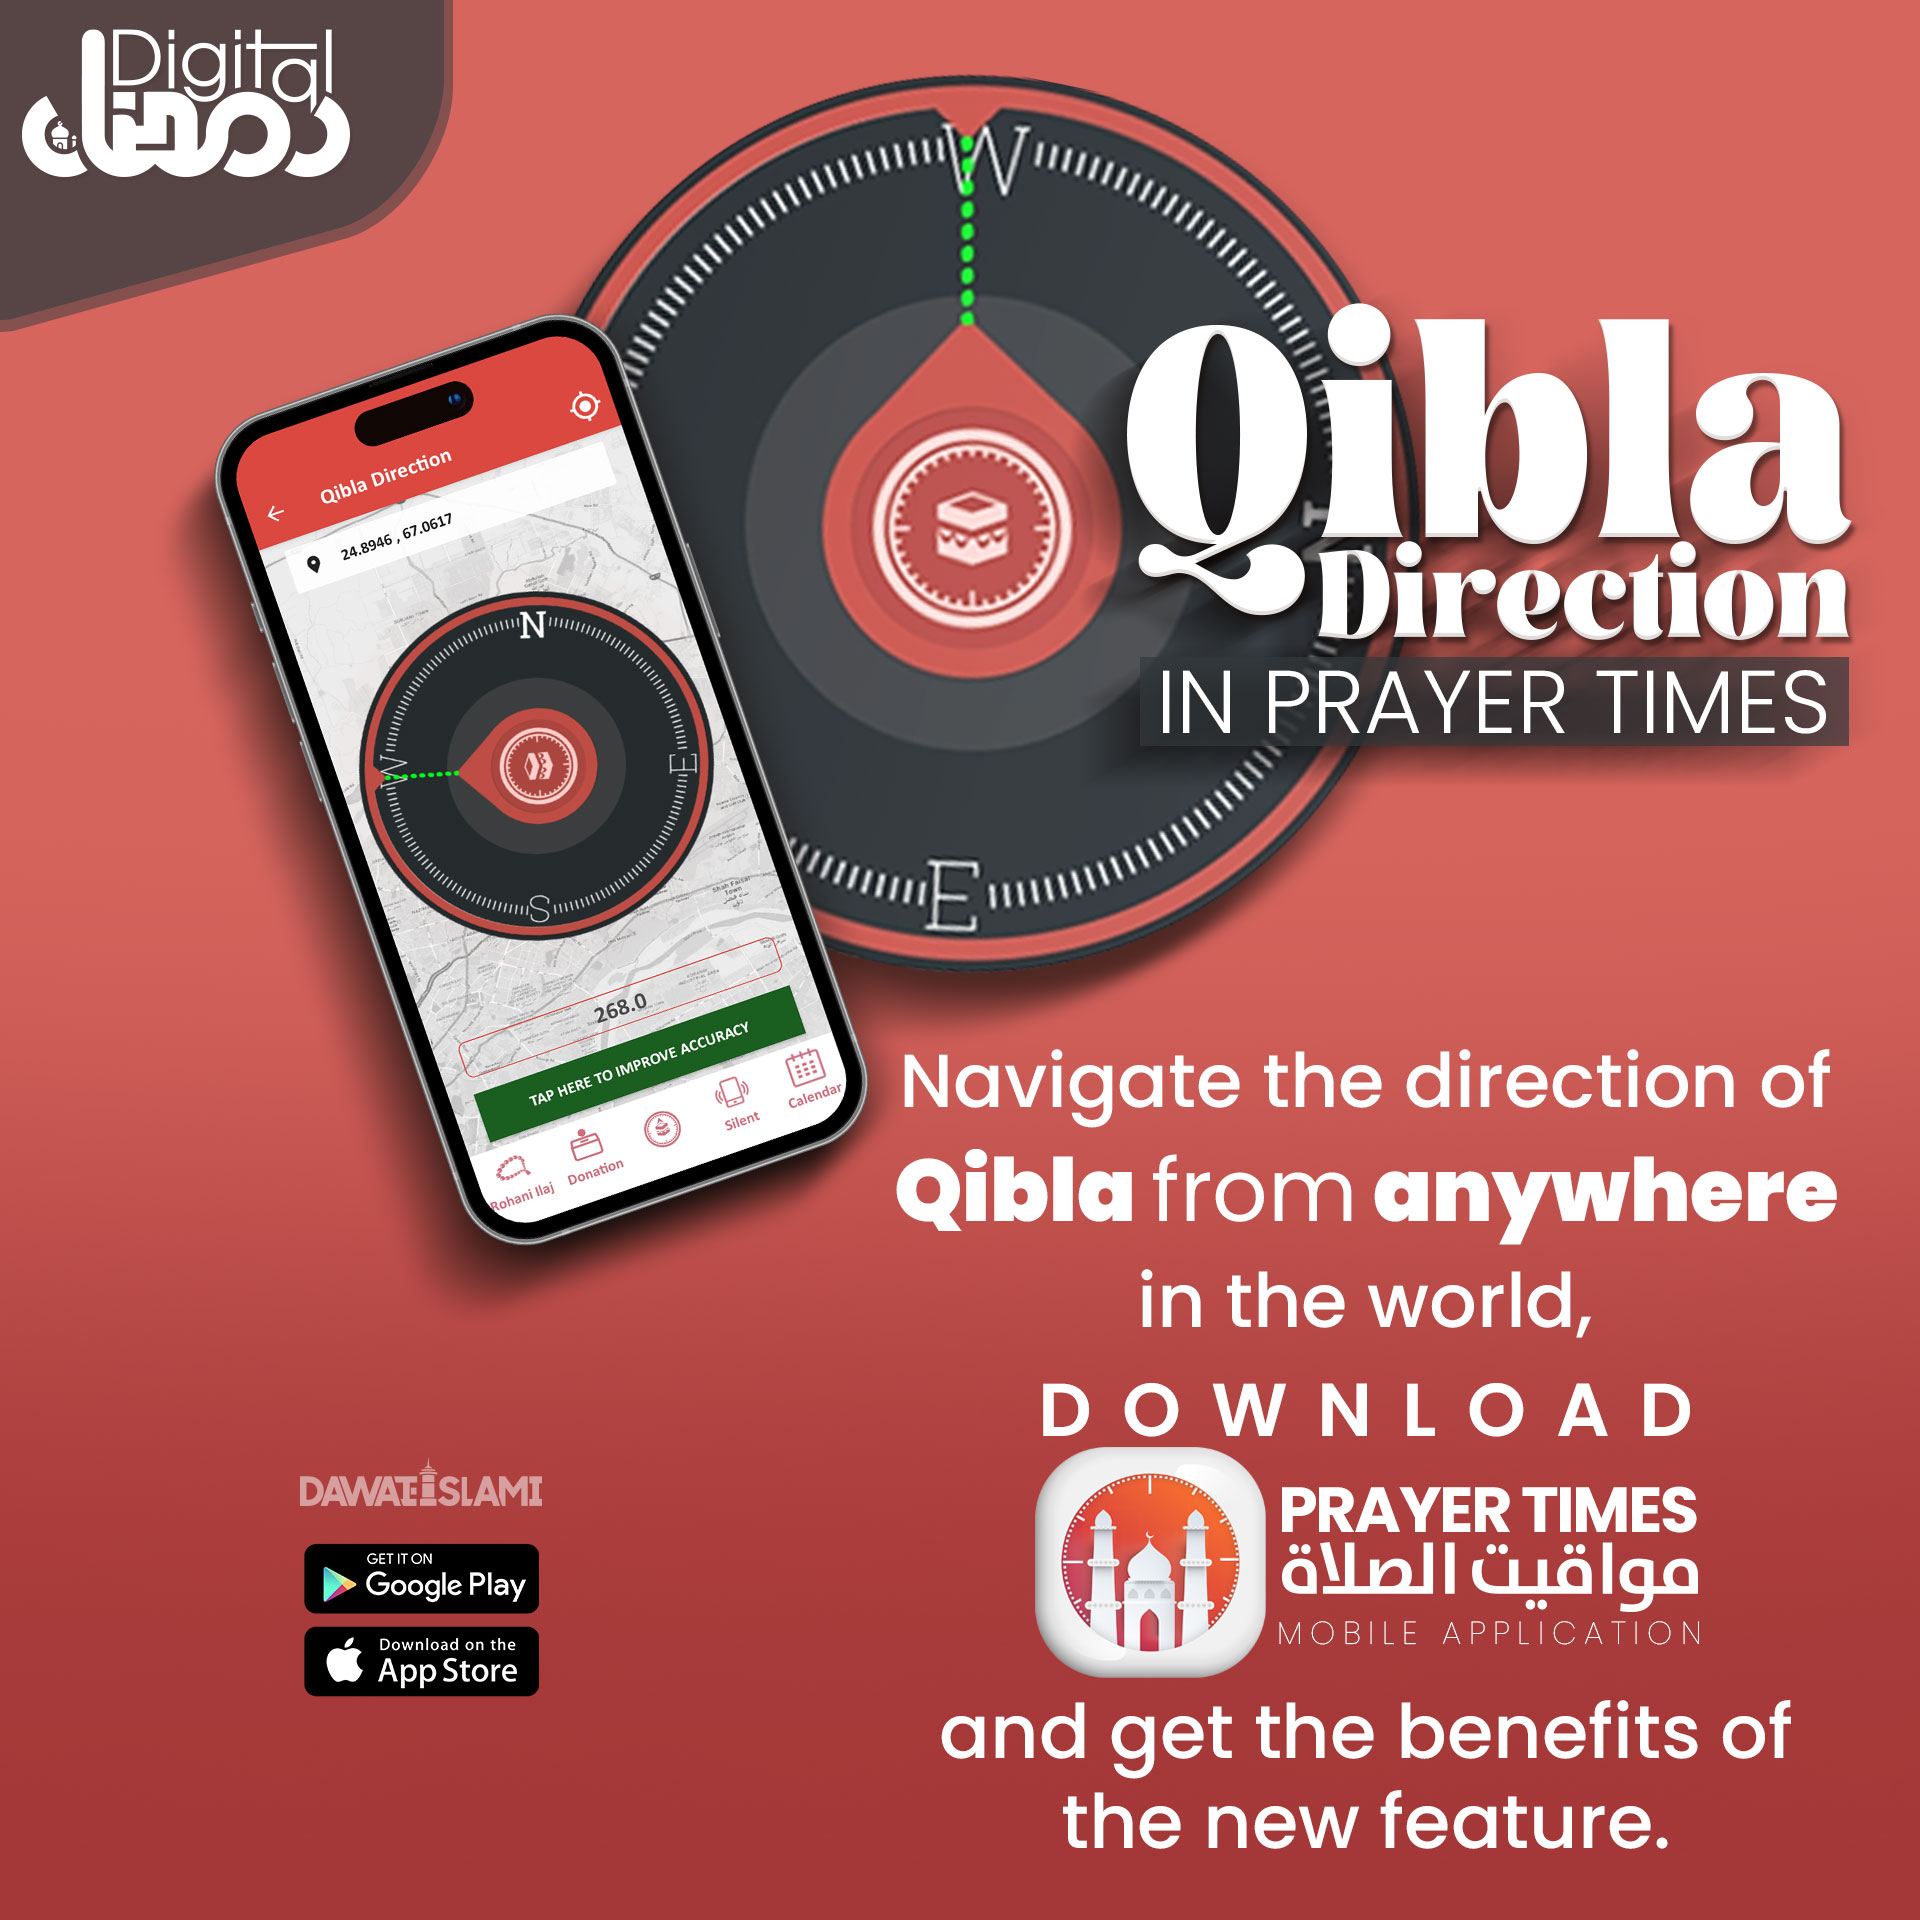 Qibla Directions in Prayer Times